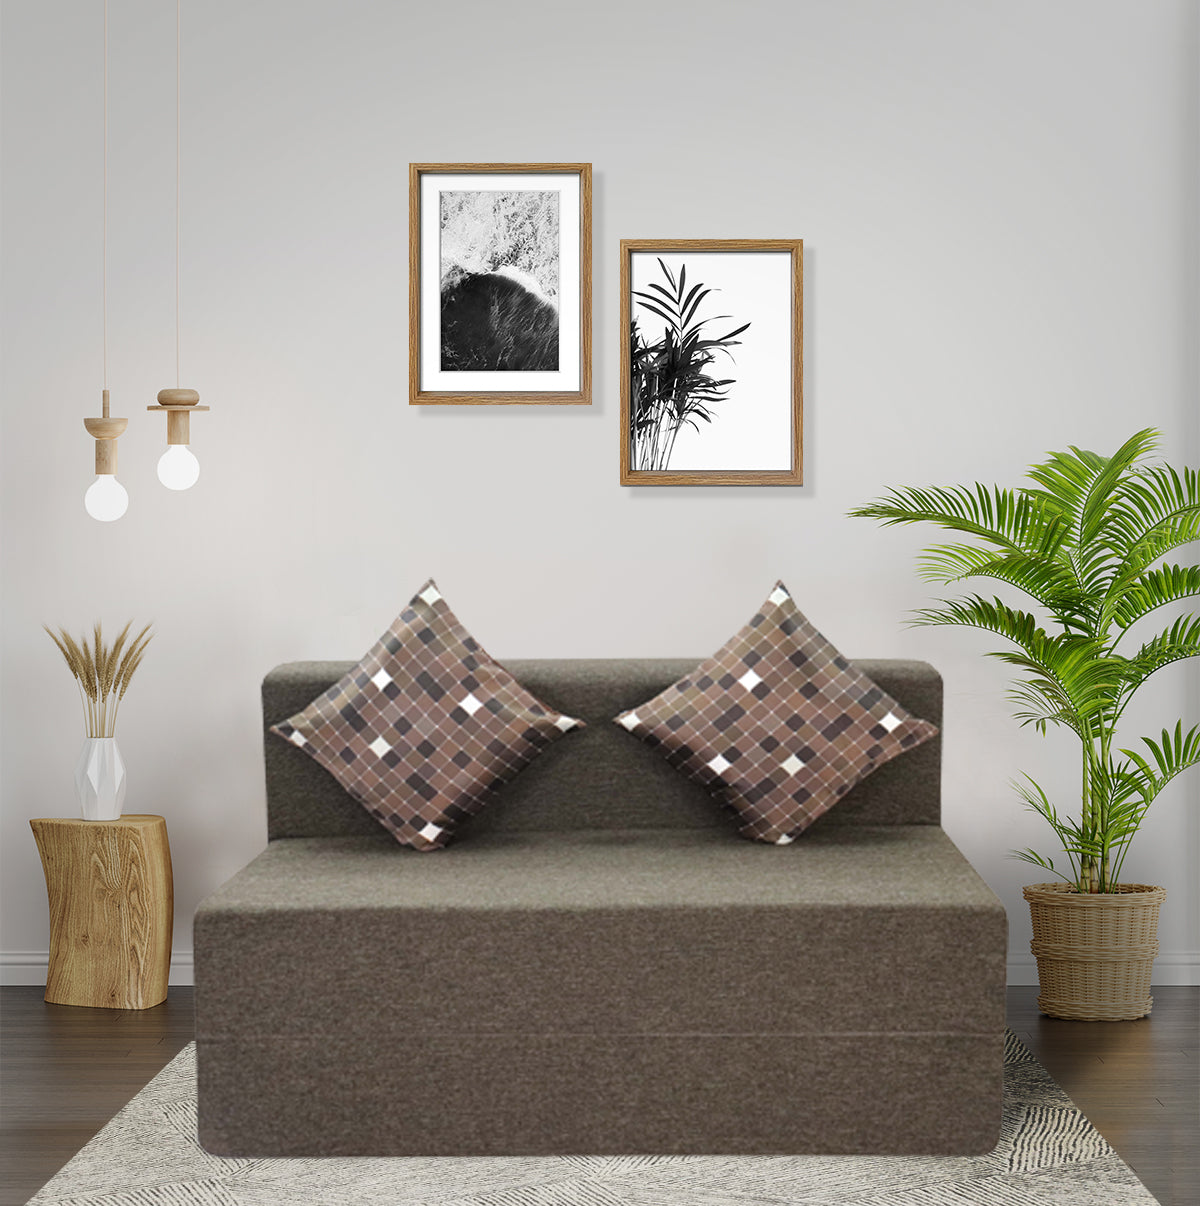 Brown Jute Fabric 6×4 Sofa cum Bed with Printed Cushion